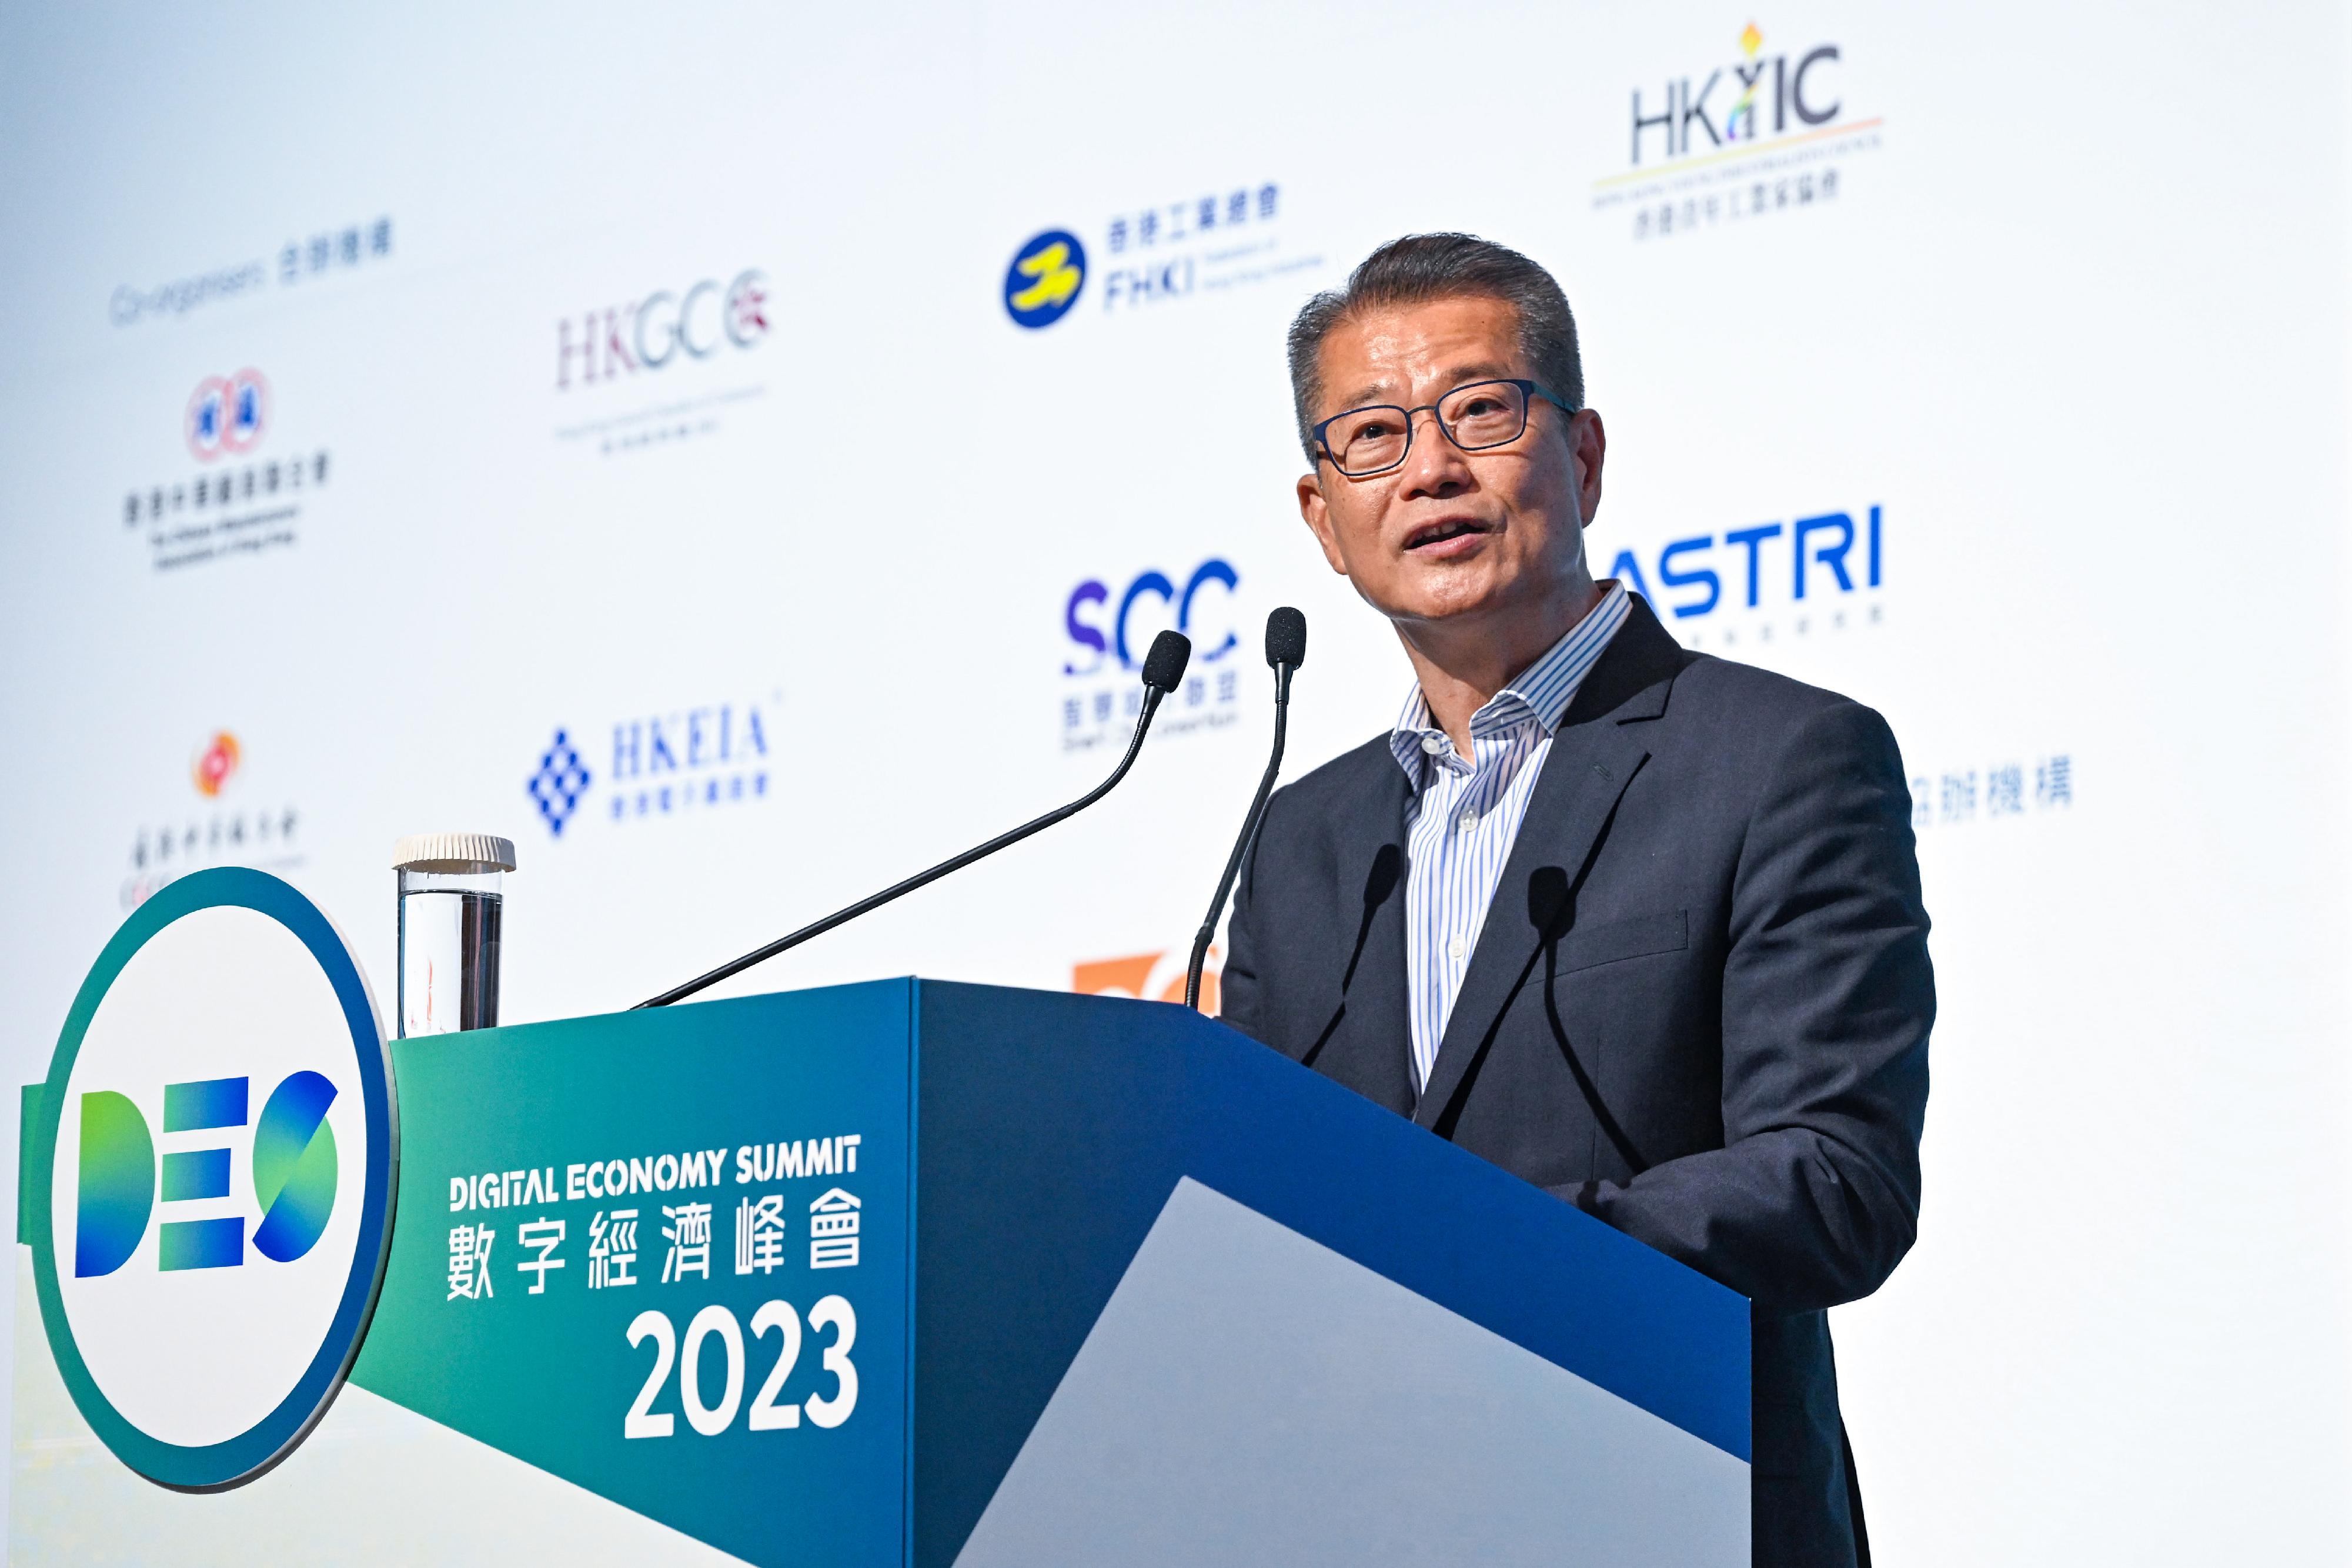 The Financial Secretary, Mr Paul Chan, speaks at the FinTech Forum of the Digital Economy Summit 2023 today (April 14).